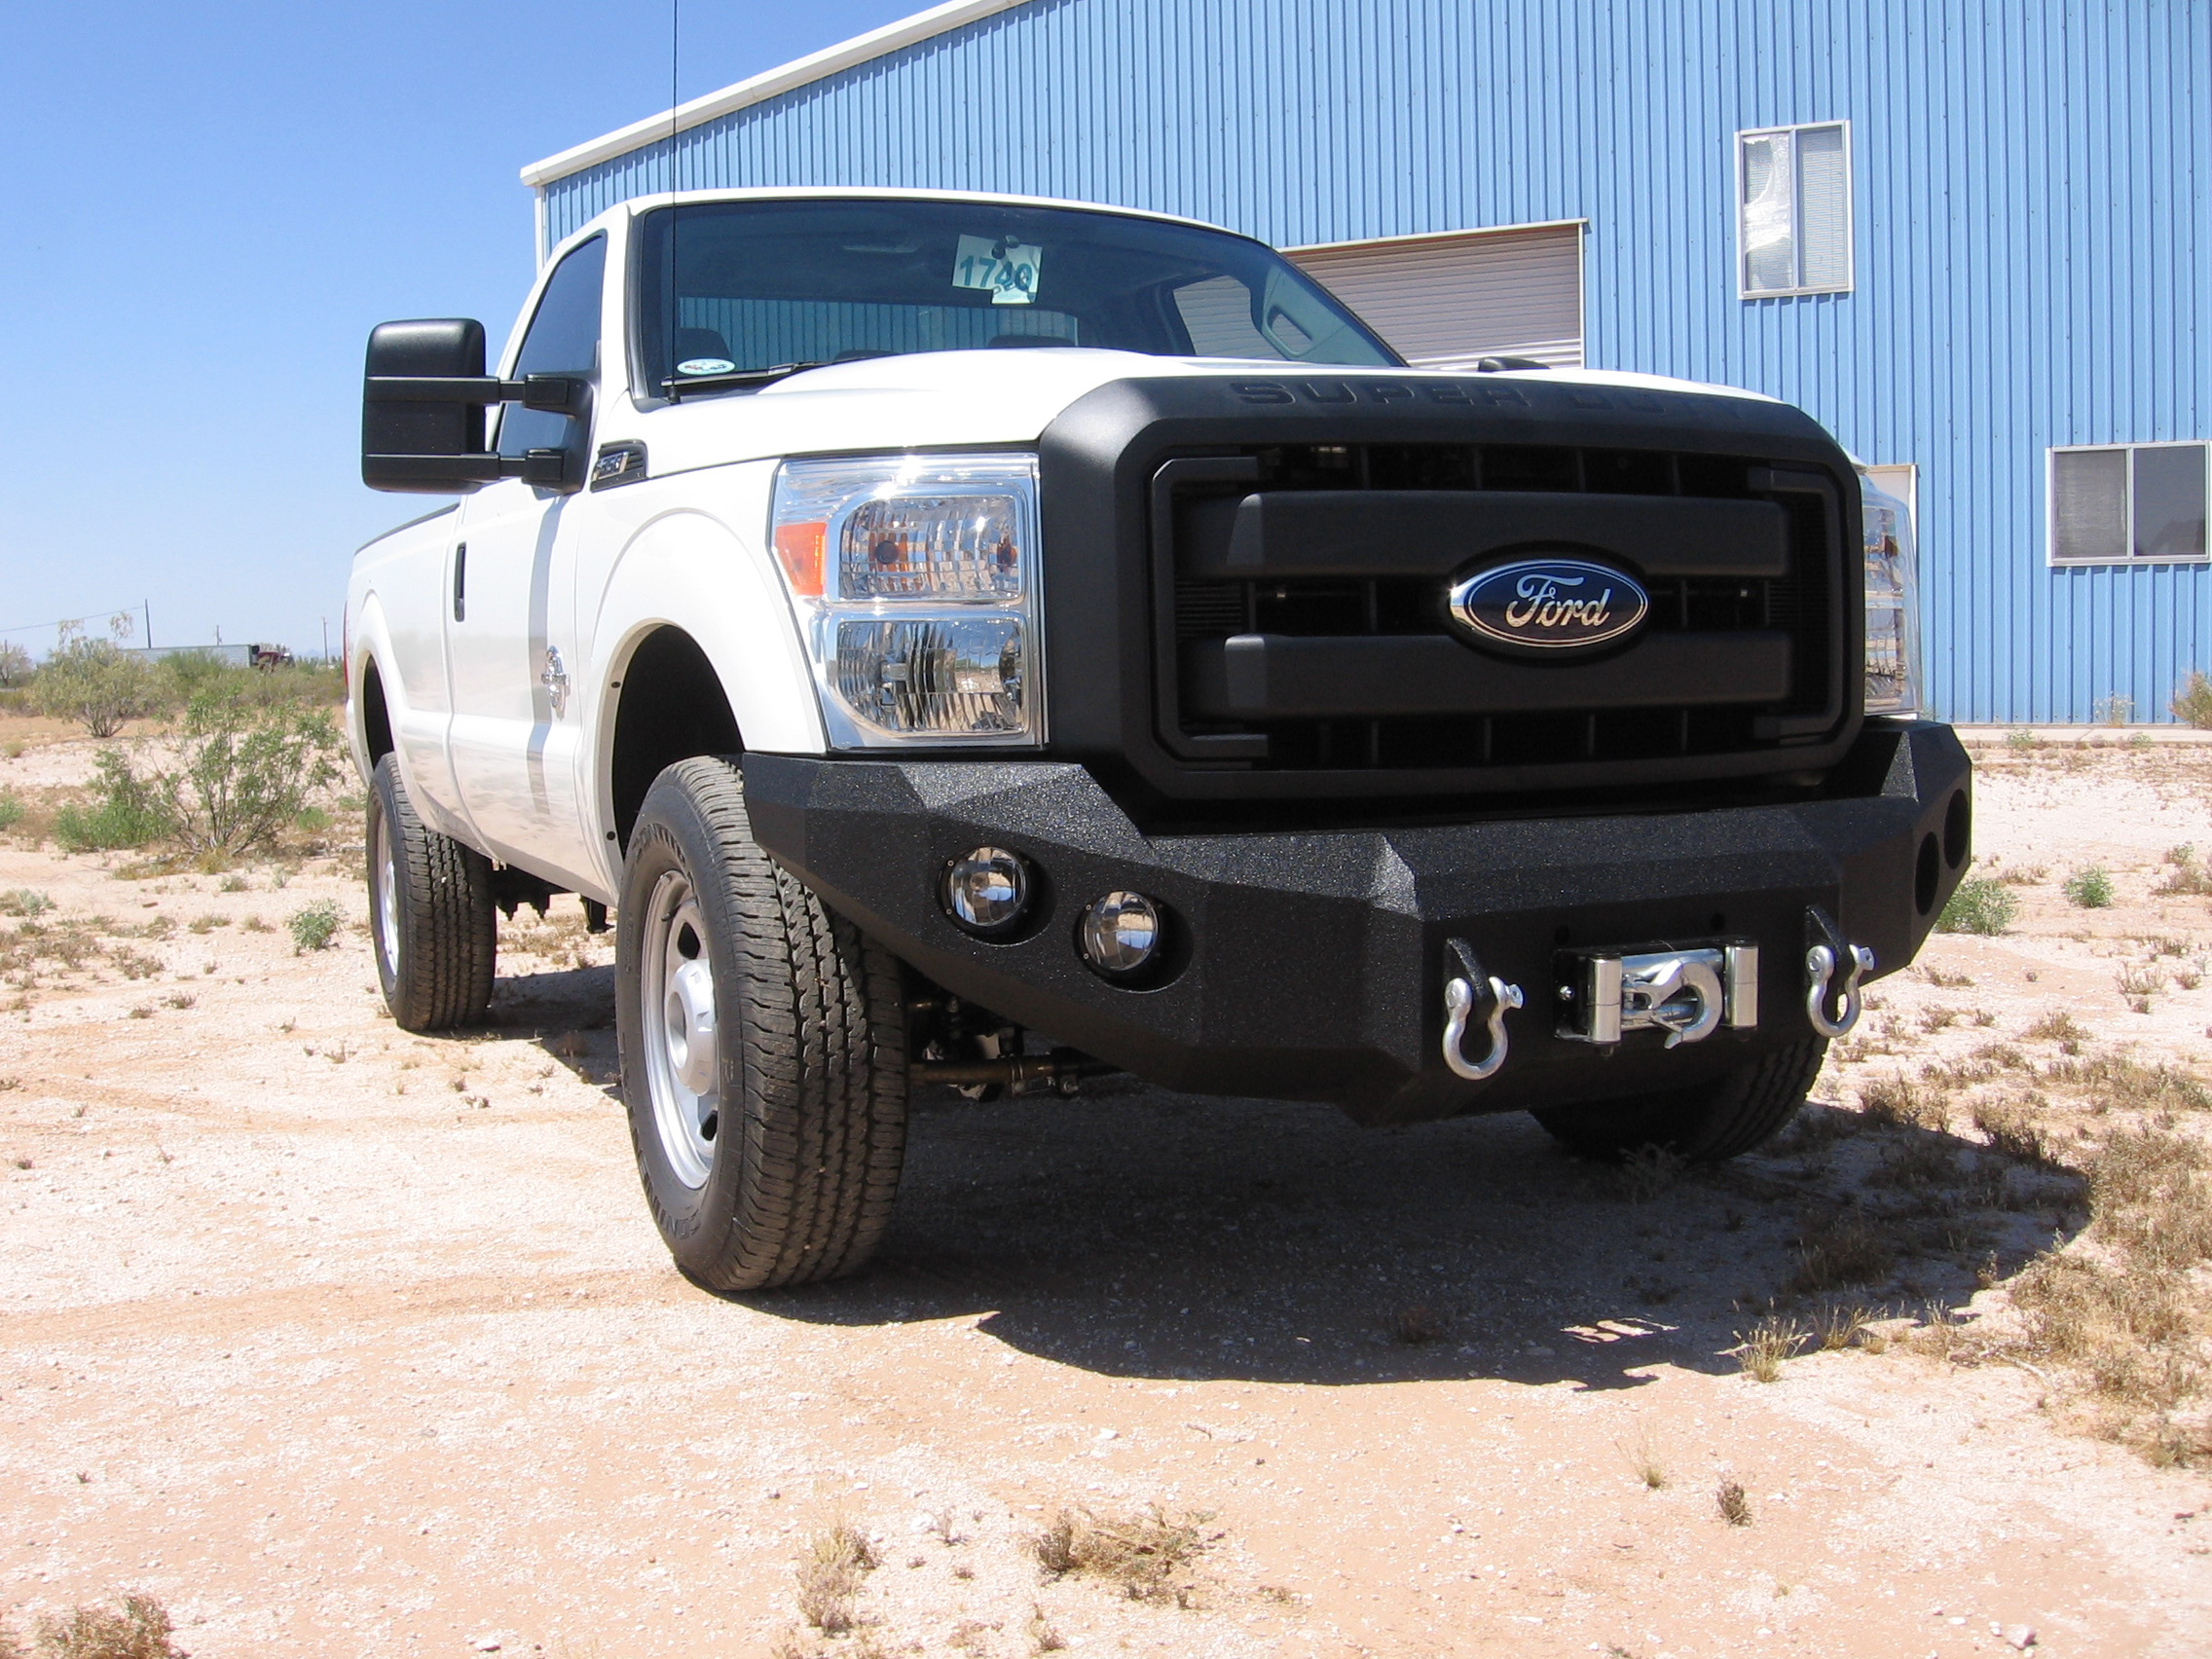 11-16 Ford F250 front base bumper